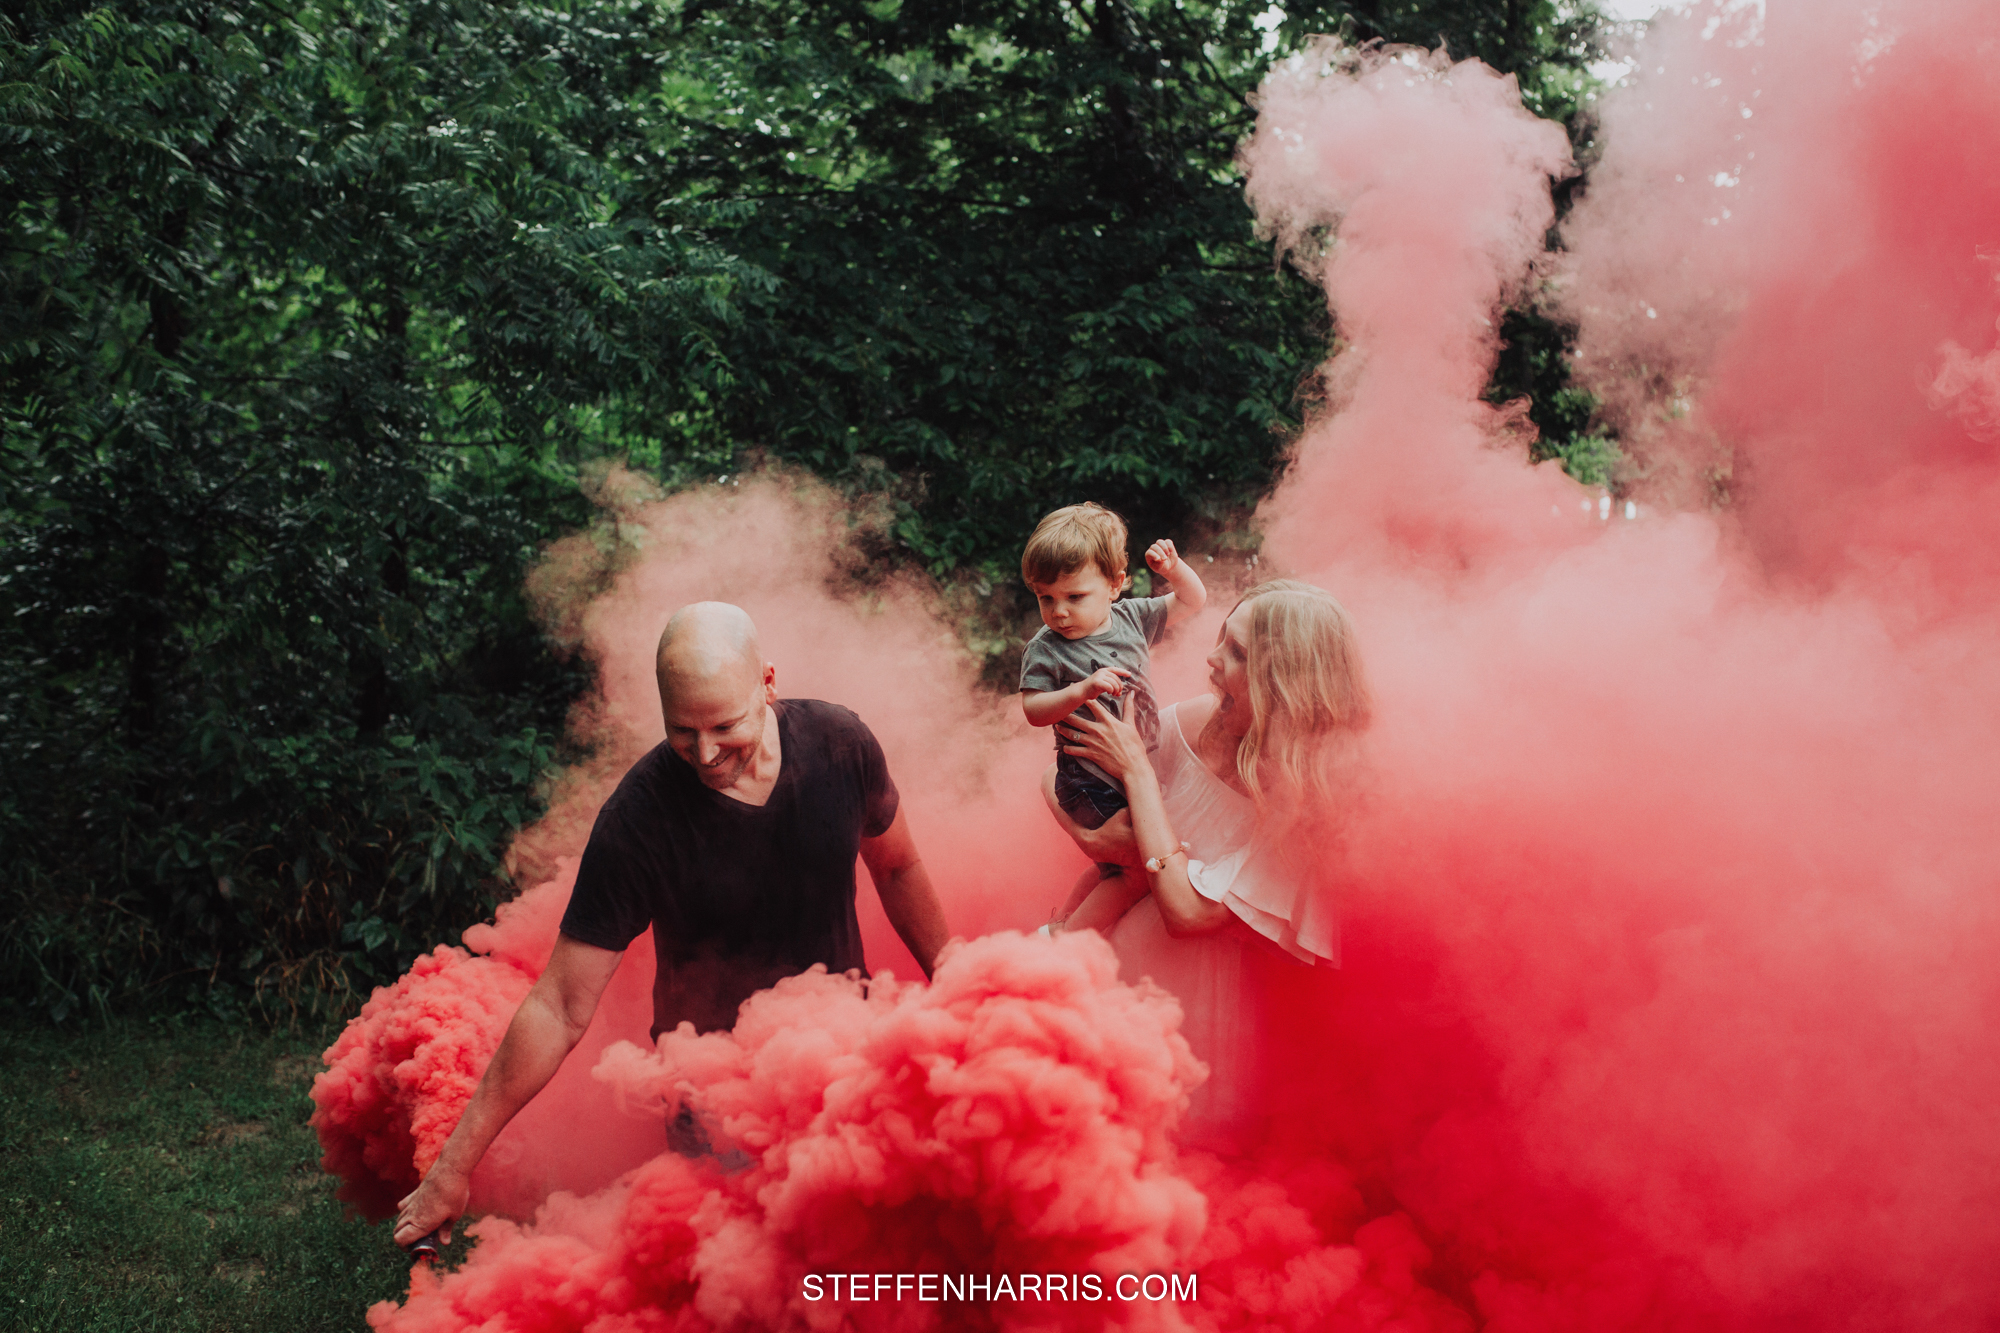 Gender Reveal with Smoke